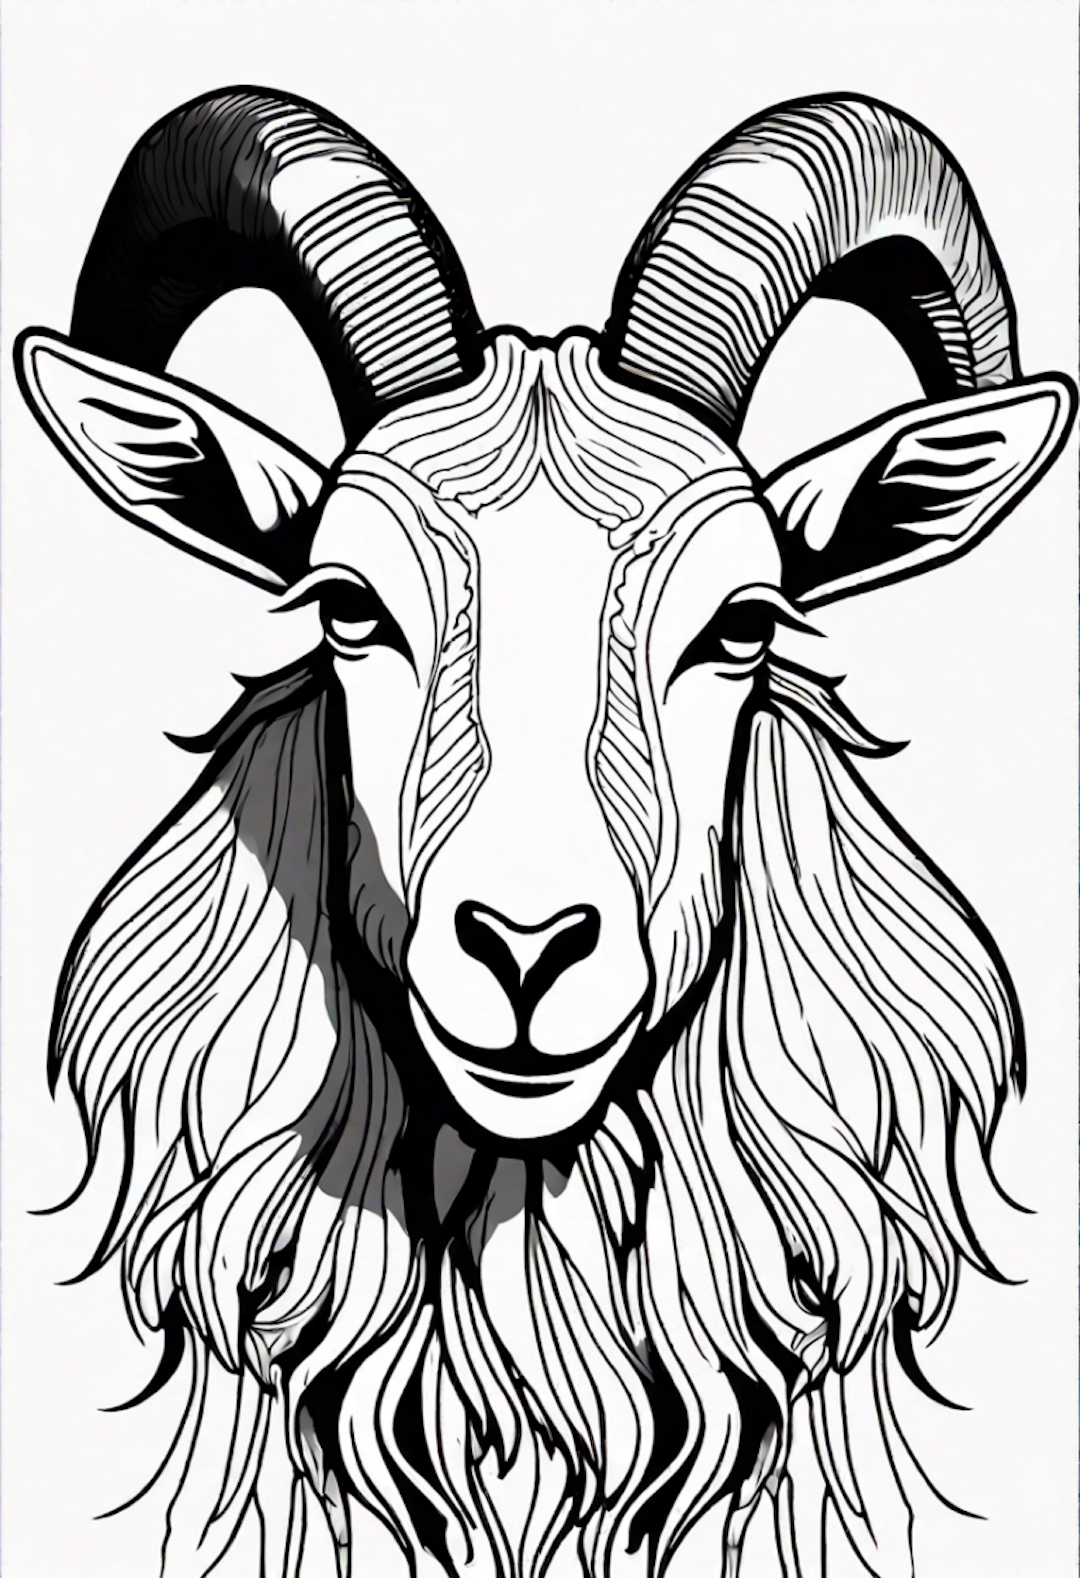 Goat coloring pages